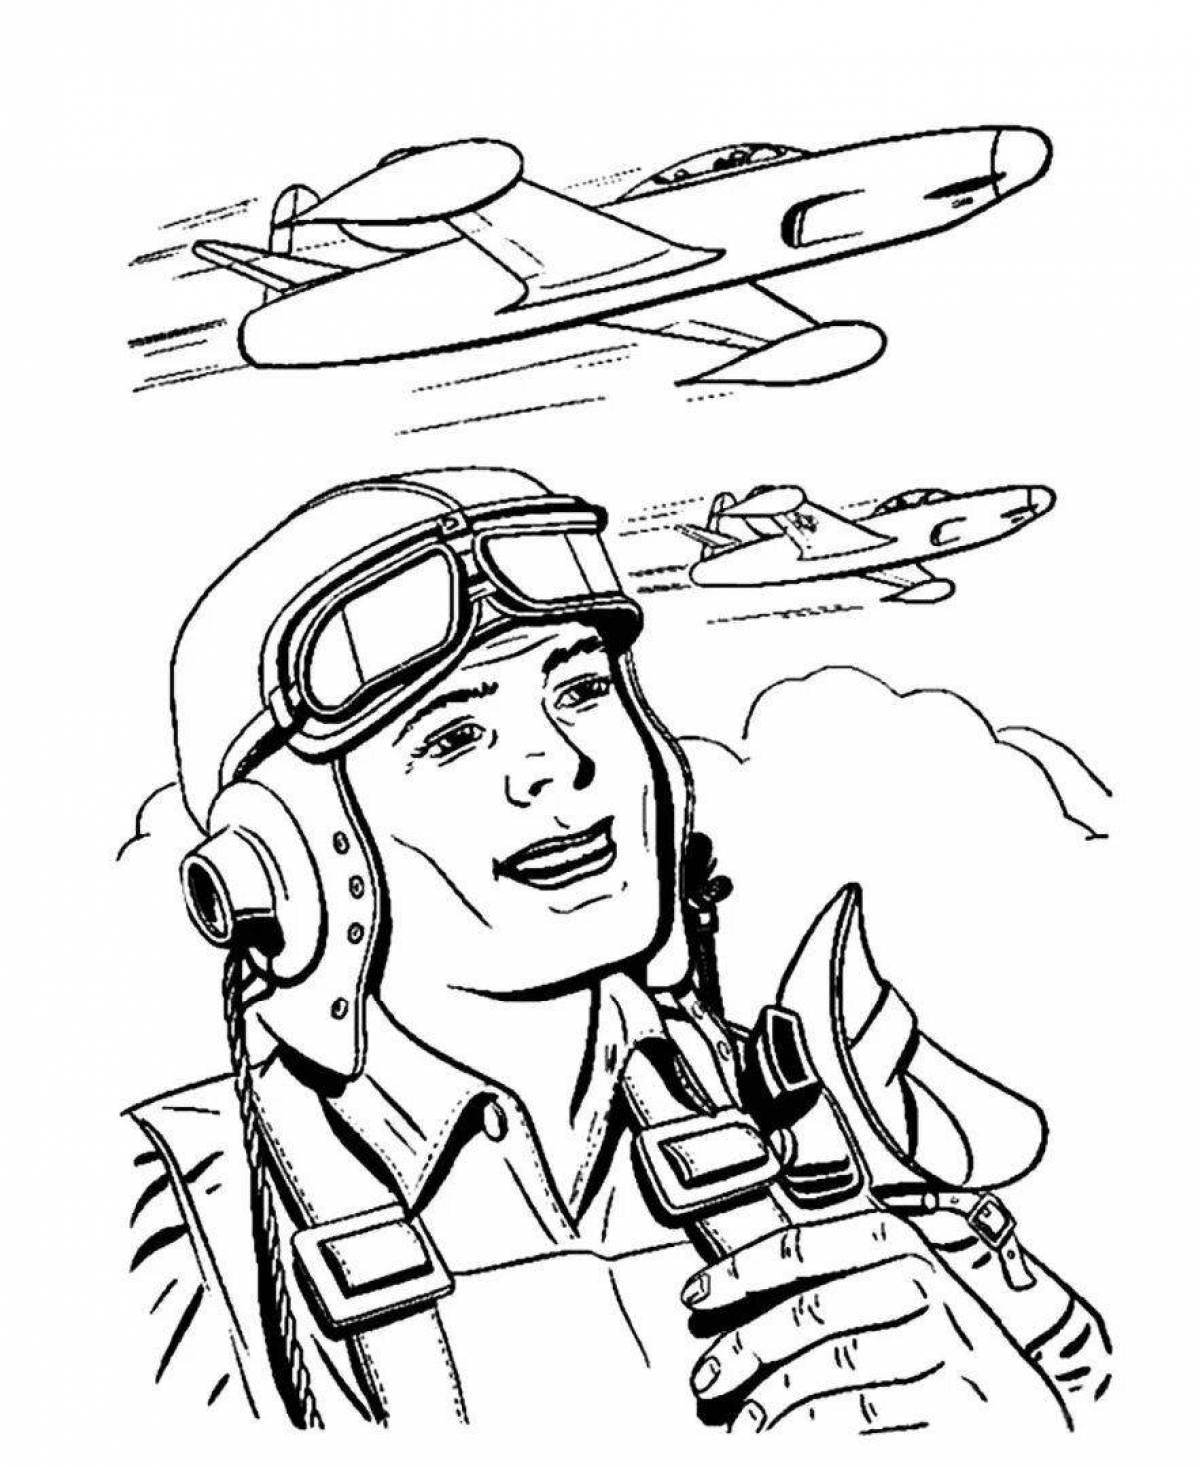 Coloring page elegant soldier with dove